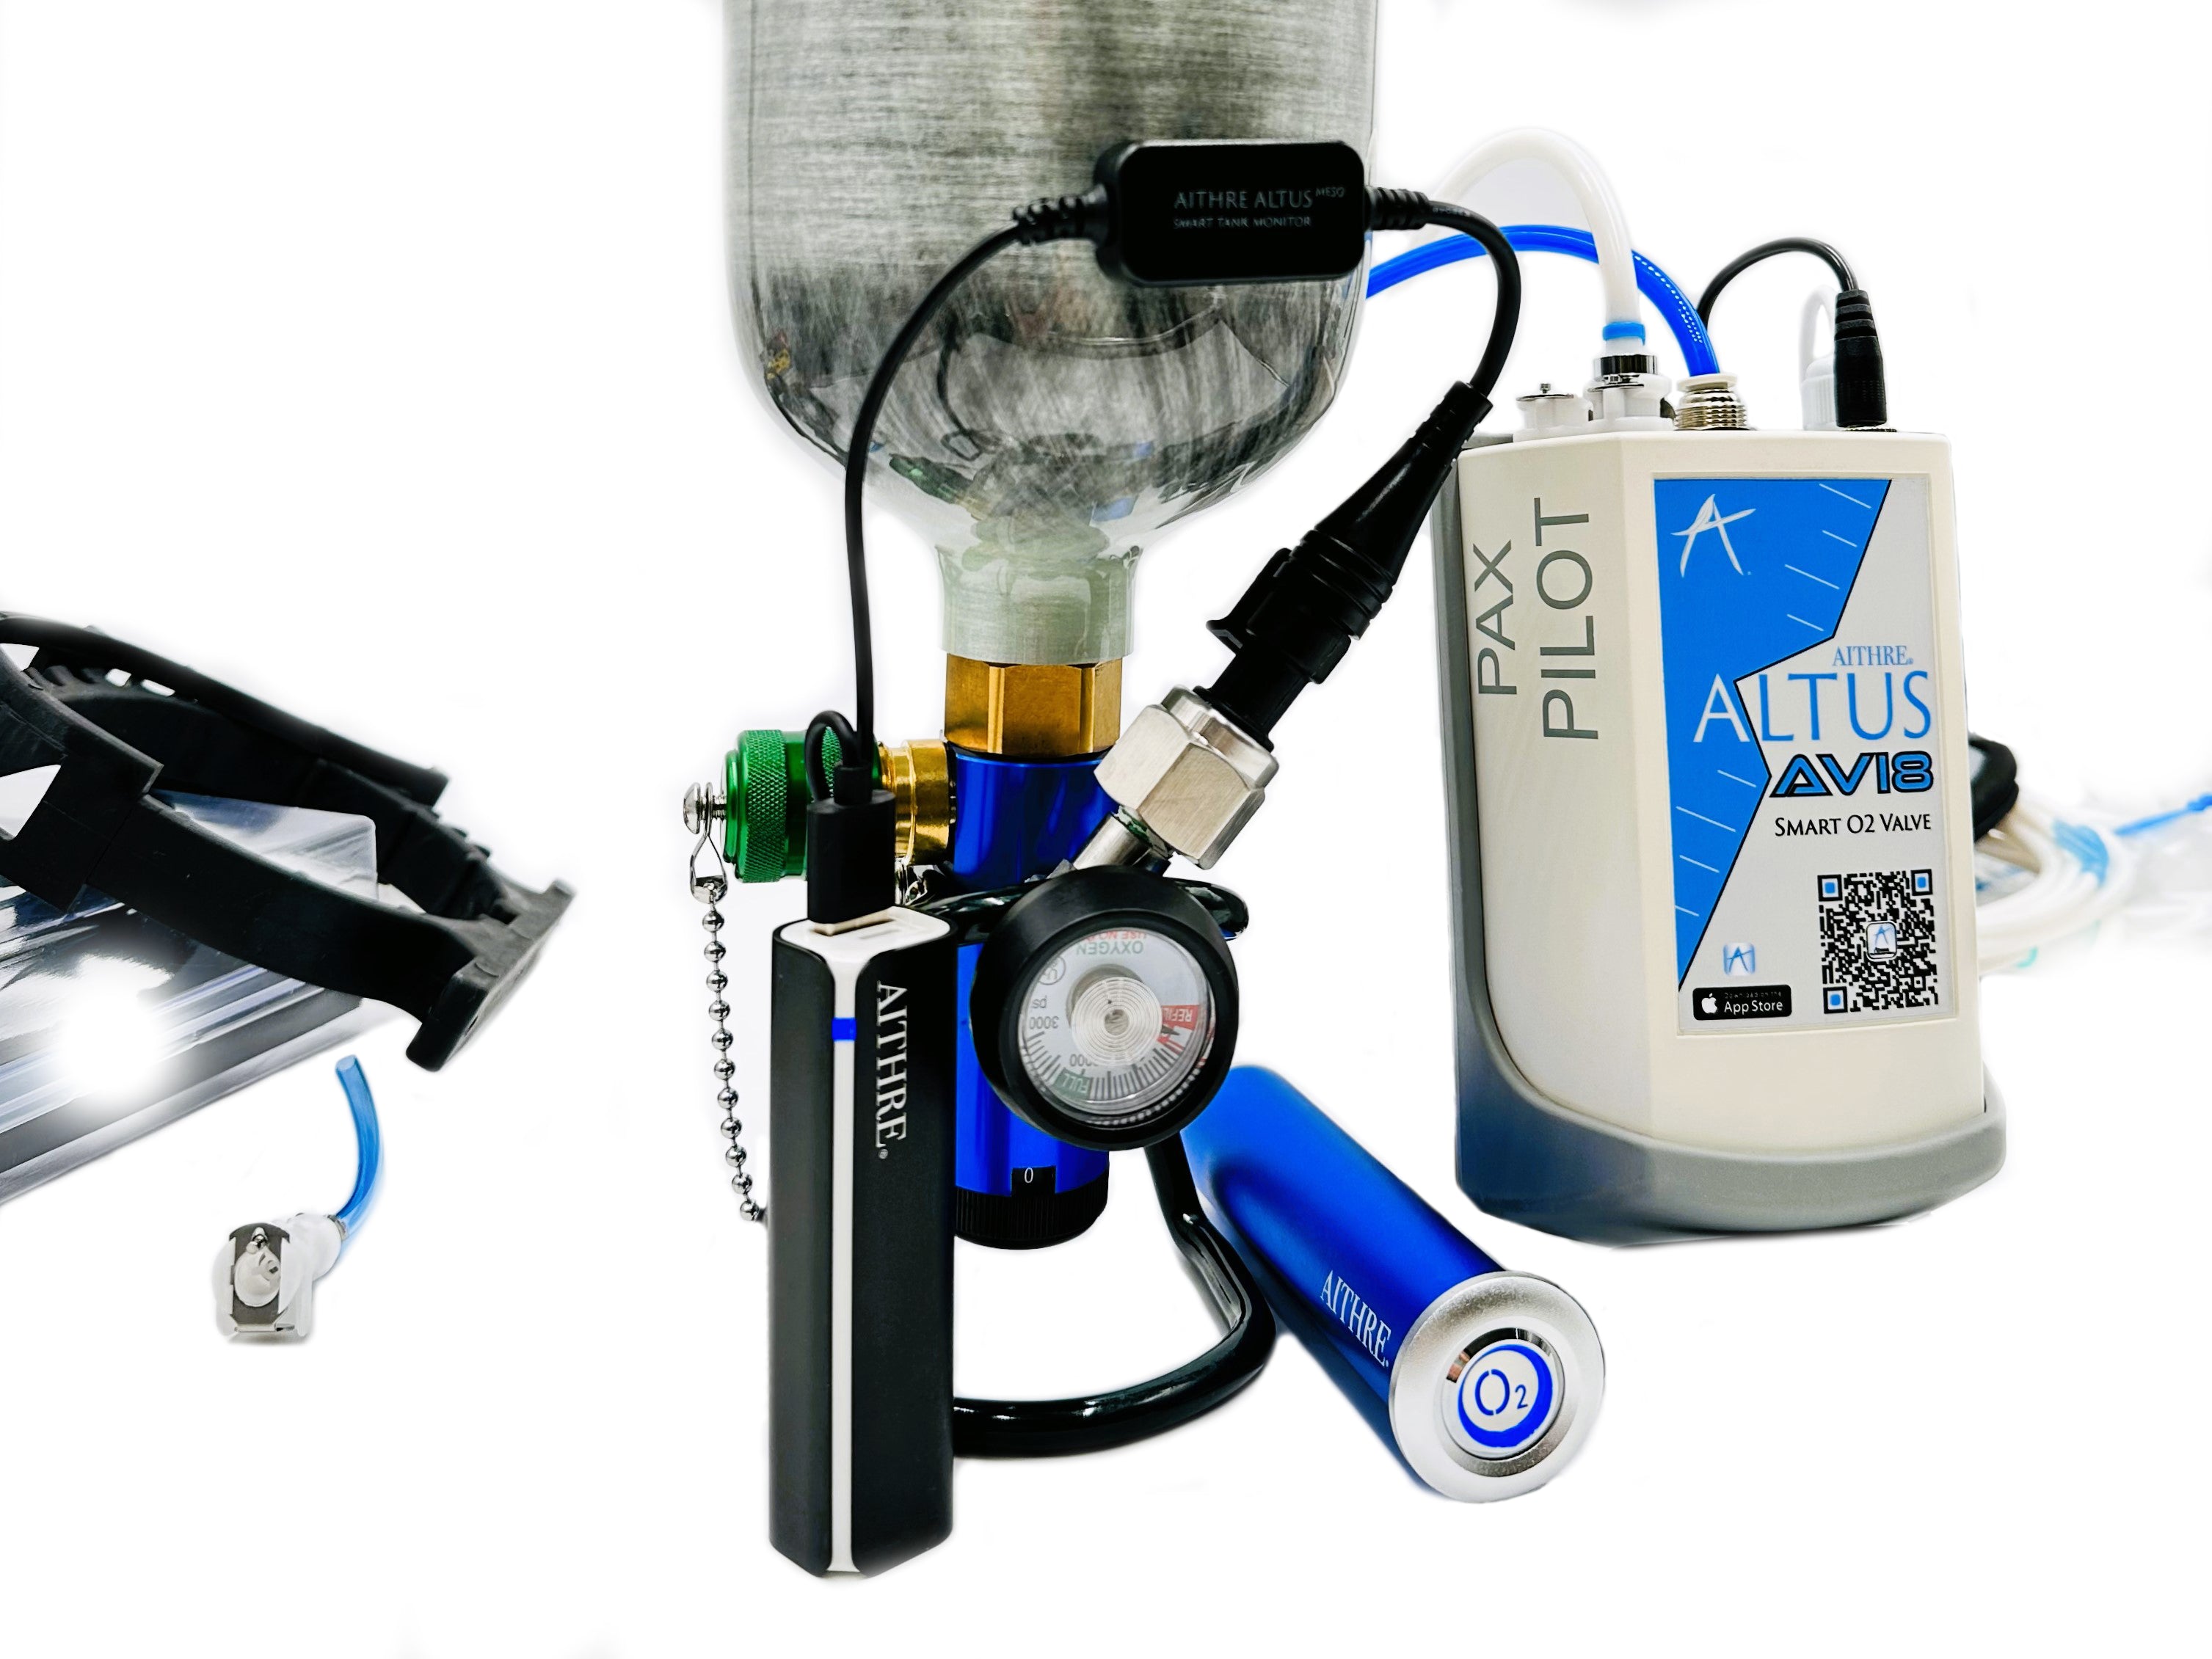 AVI8 2-Place Smart O2 Valve with 408L Bottle and Altus Meso